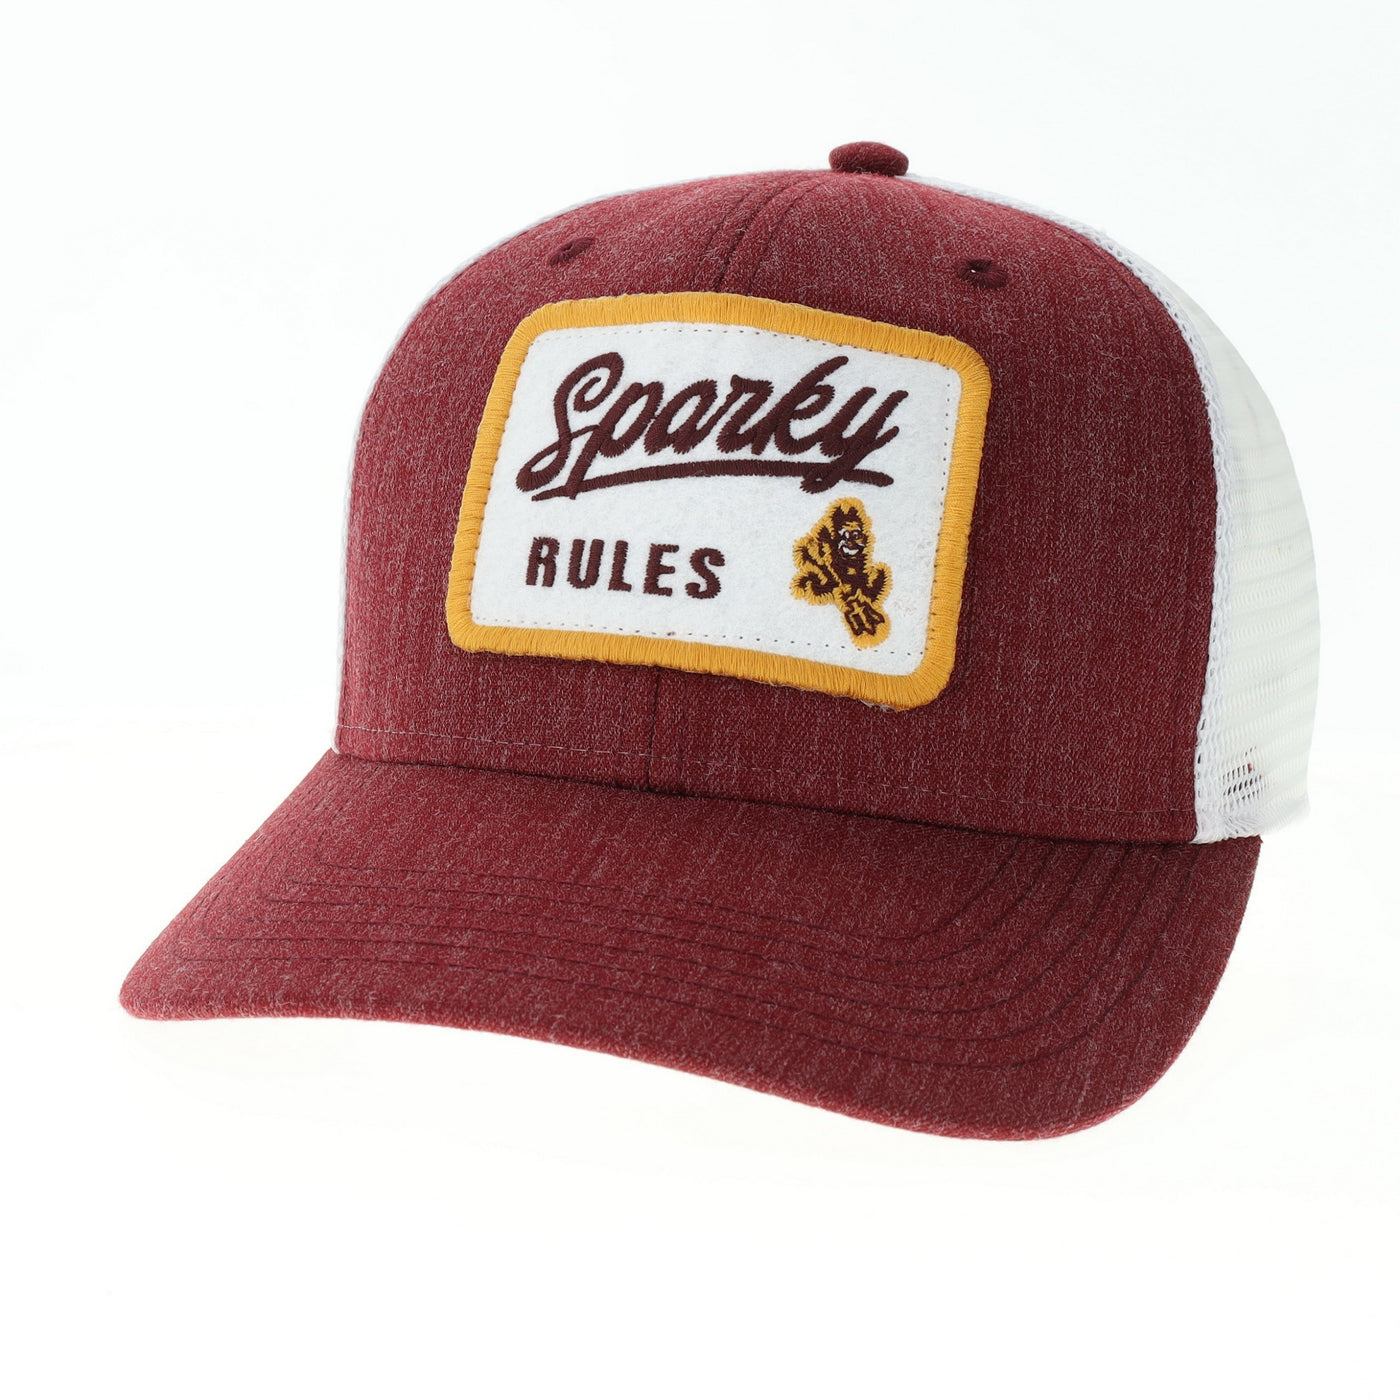 ASU maroon trucker hat with white mesh back and a patch with 'Sparky Rules' lettering next to Sparky 